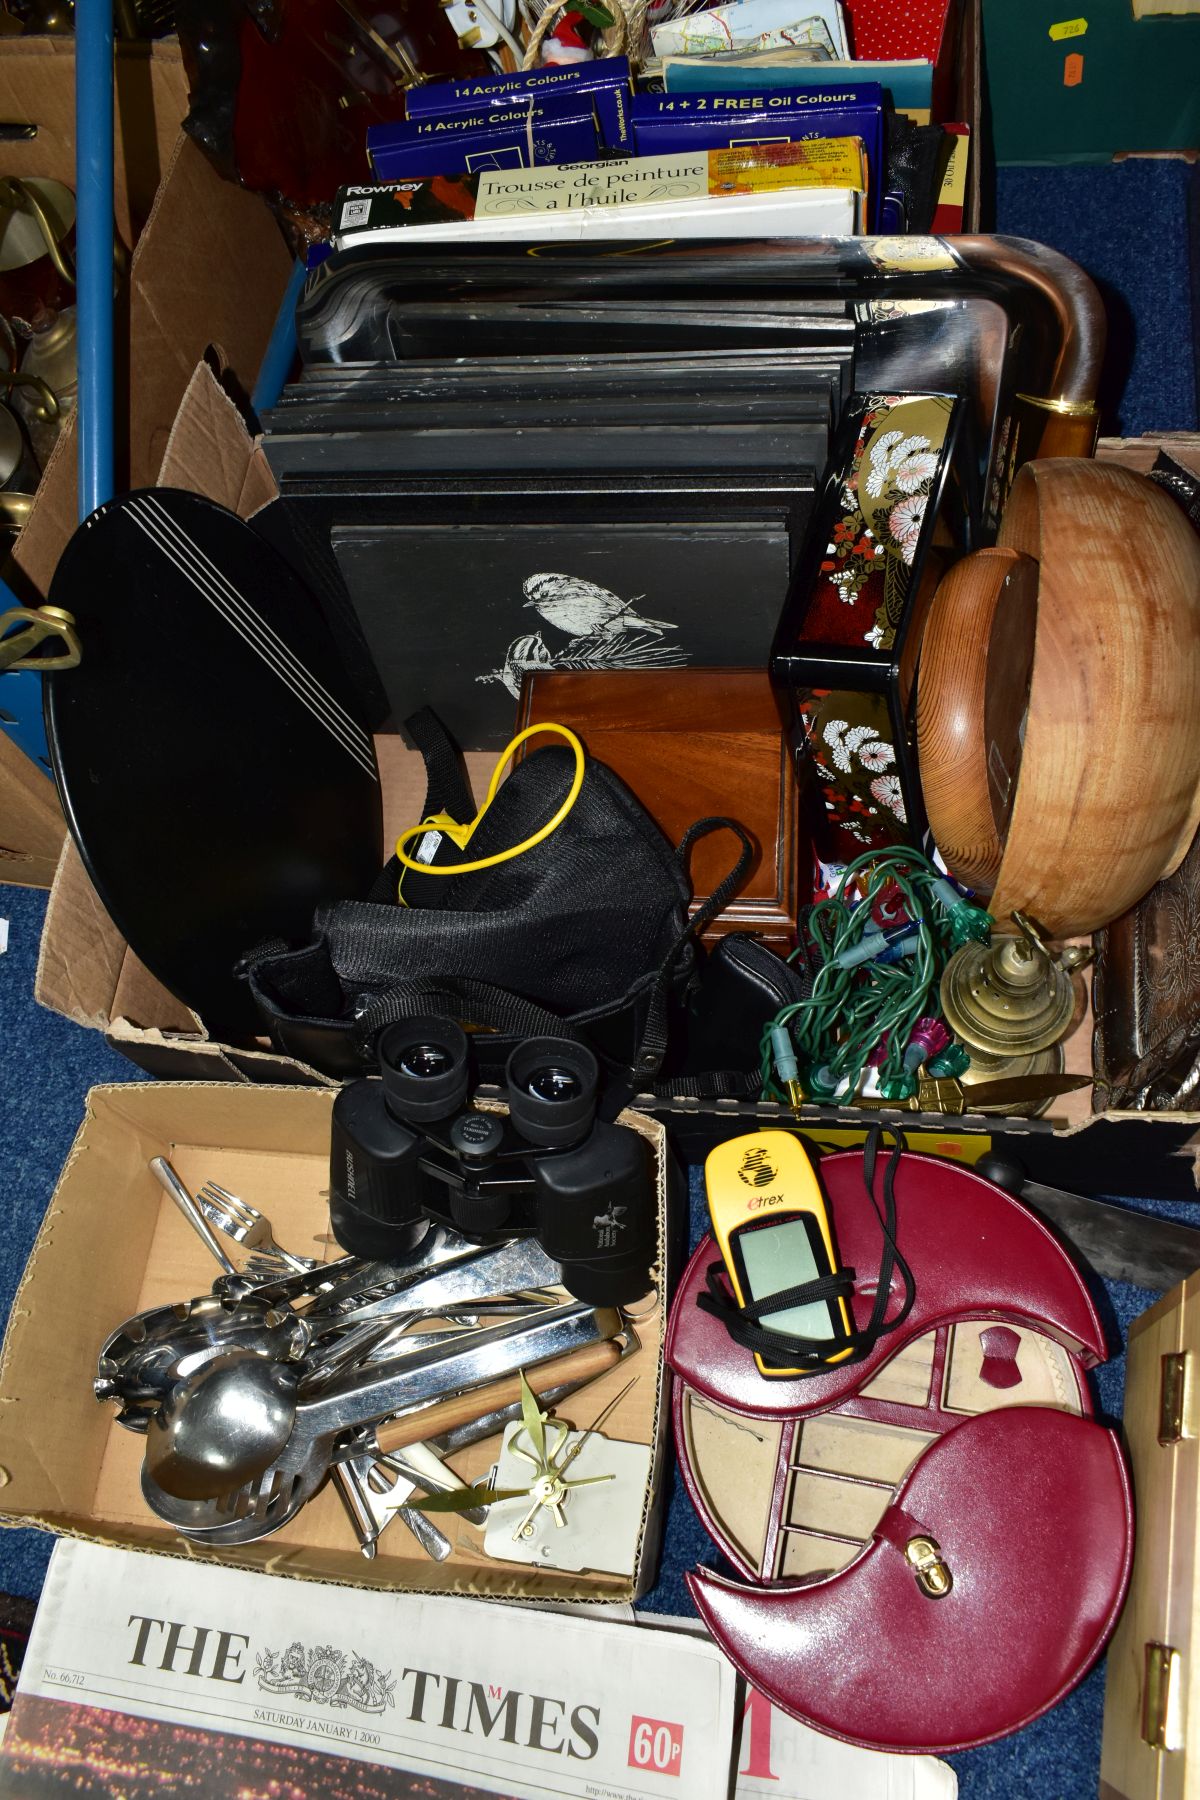 THREE BOXES AND LOOSE ART MATERIALS, CHRISTMAS DECORATIONS, METALWARES AND SUNDRY HOUSEHOLD ITEMS, - Image 3 of 5